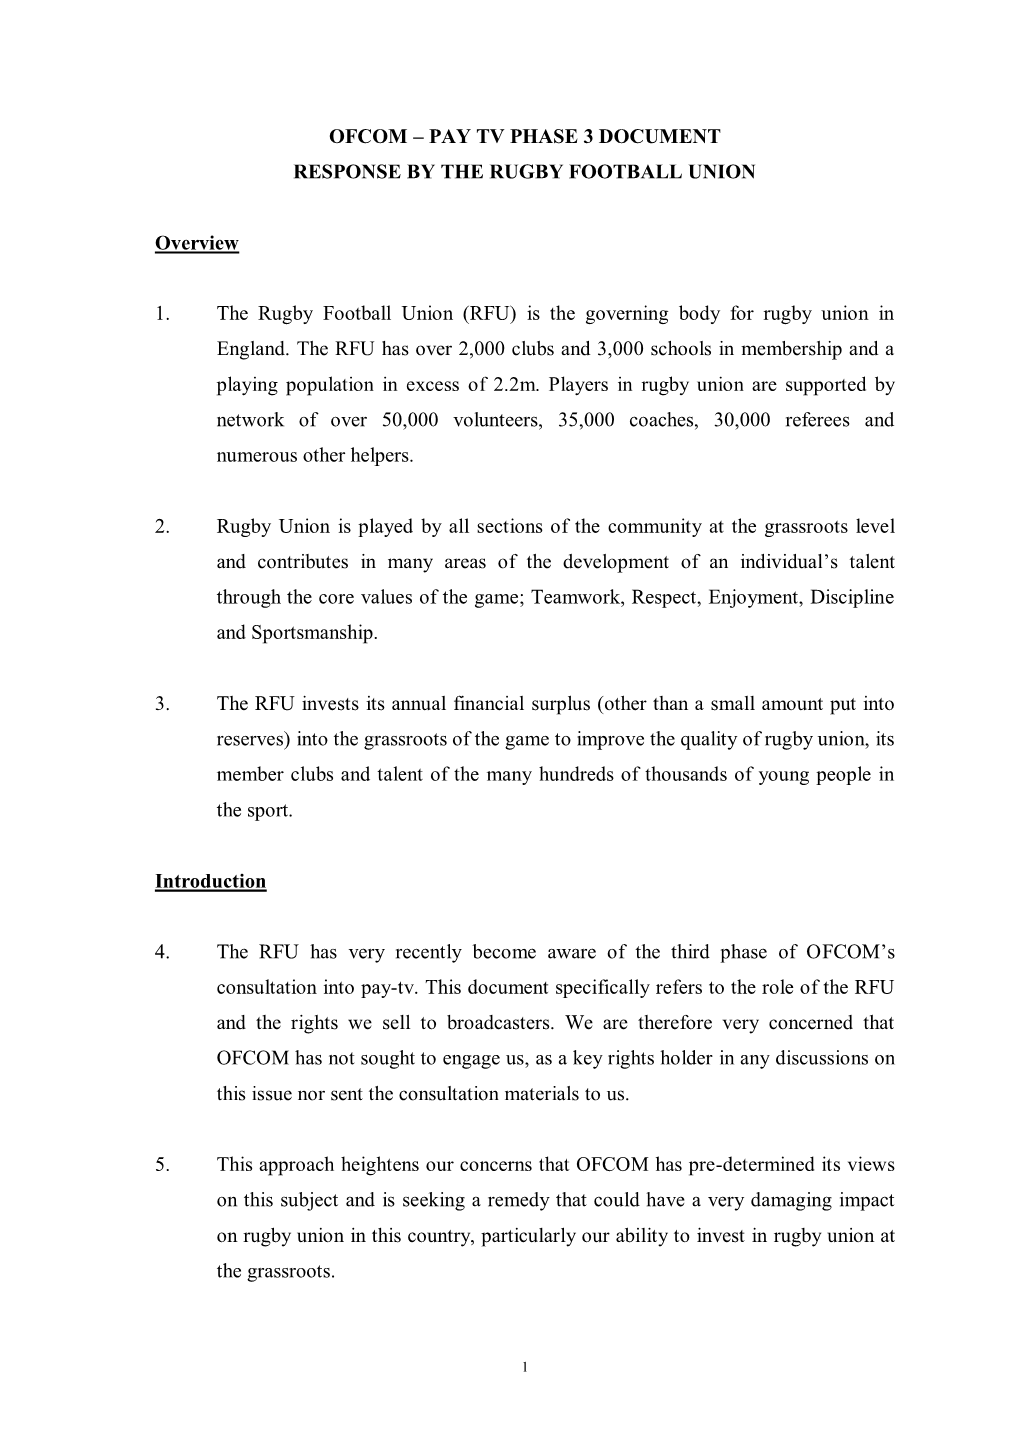 Pay Tv Phase 3 Document Response by the Rugby Football Union